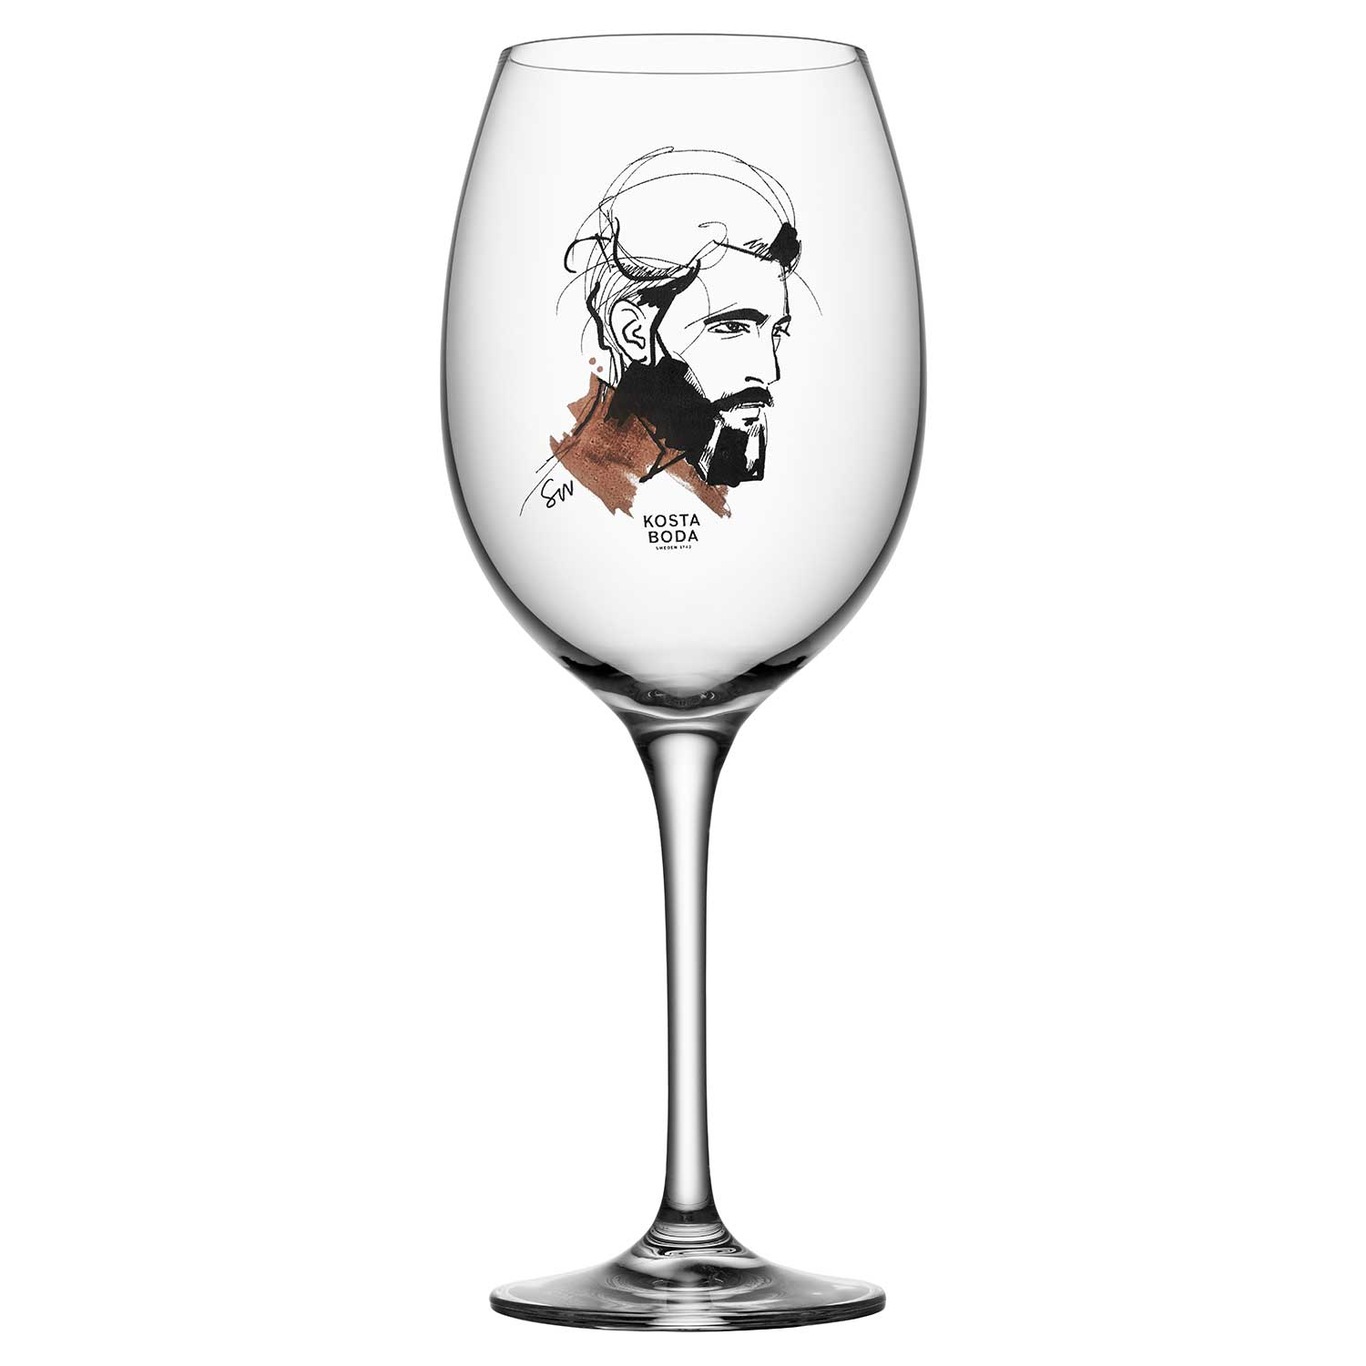 All About You Wine Glass 52 cl 2-pack, Wait For Him